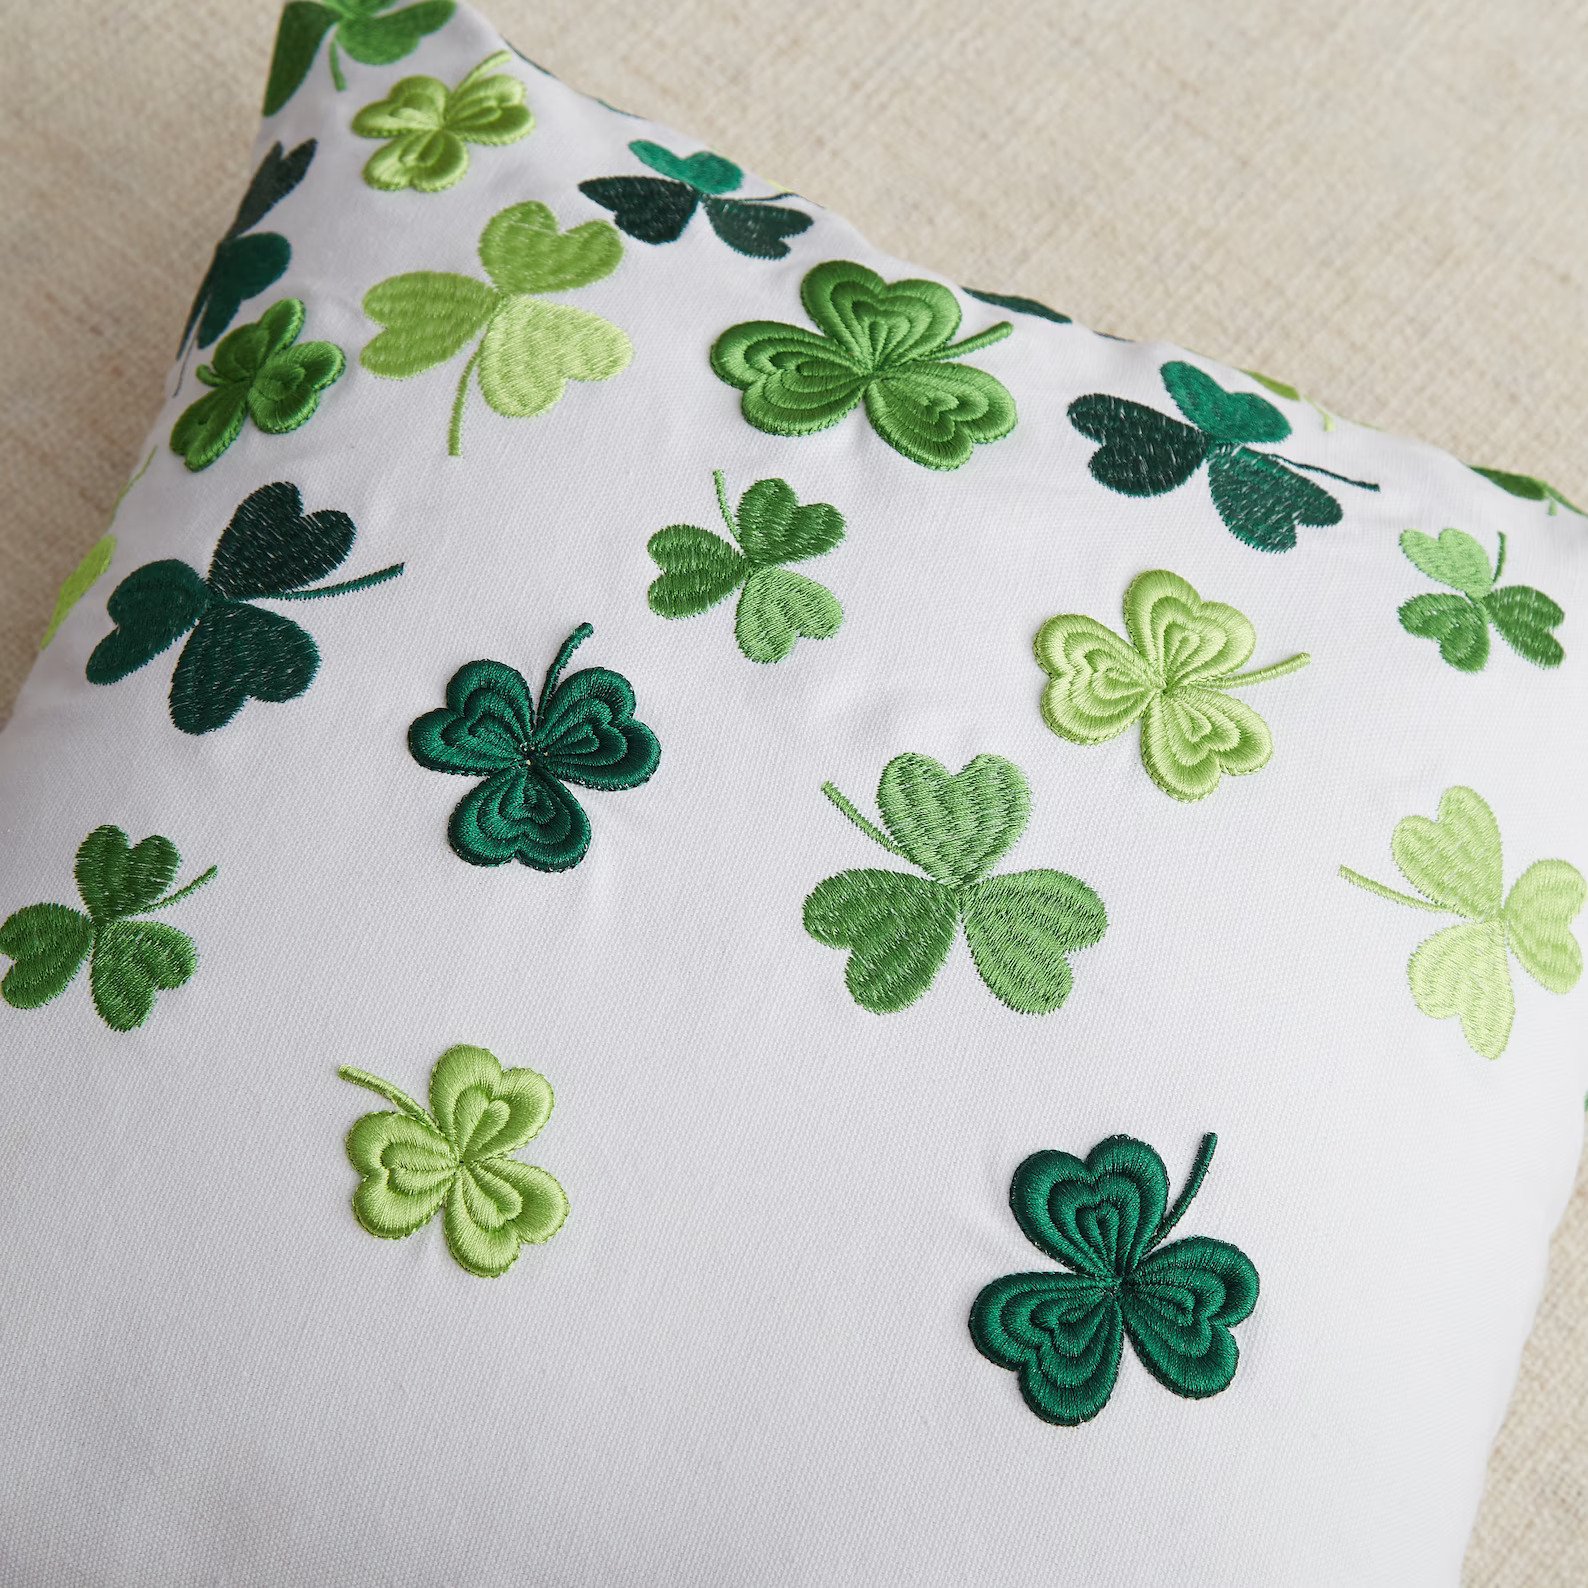 15 Wonderful St. Patrick's Day Pillow Cover Designs for an Irish Touch